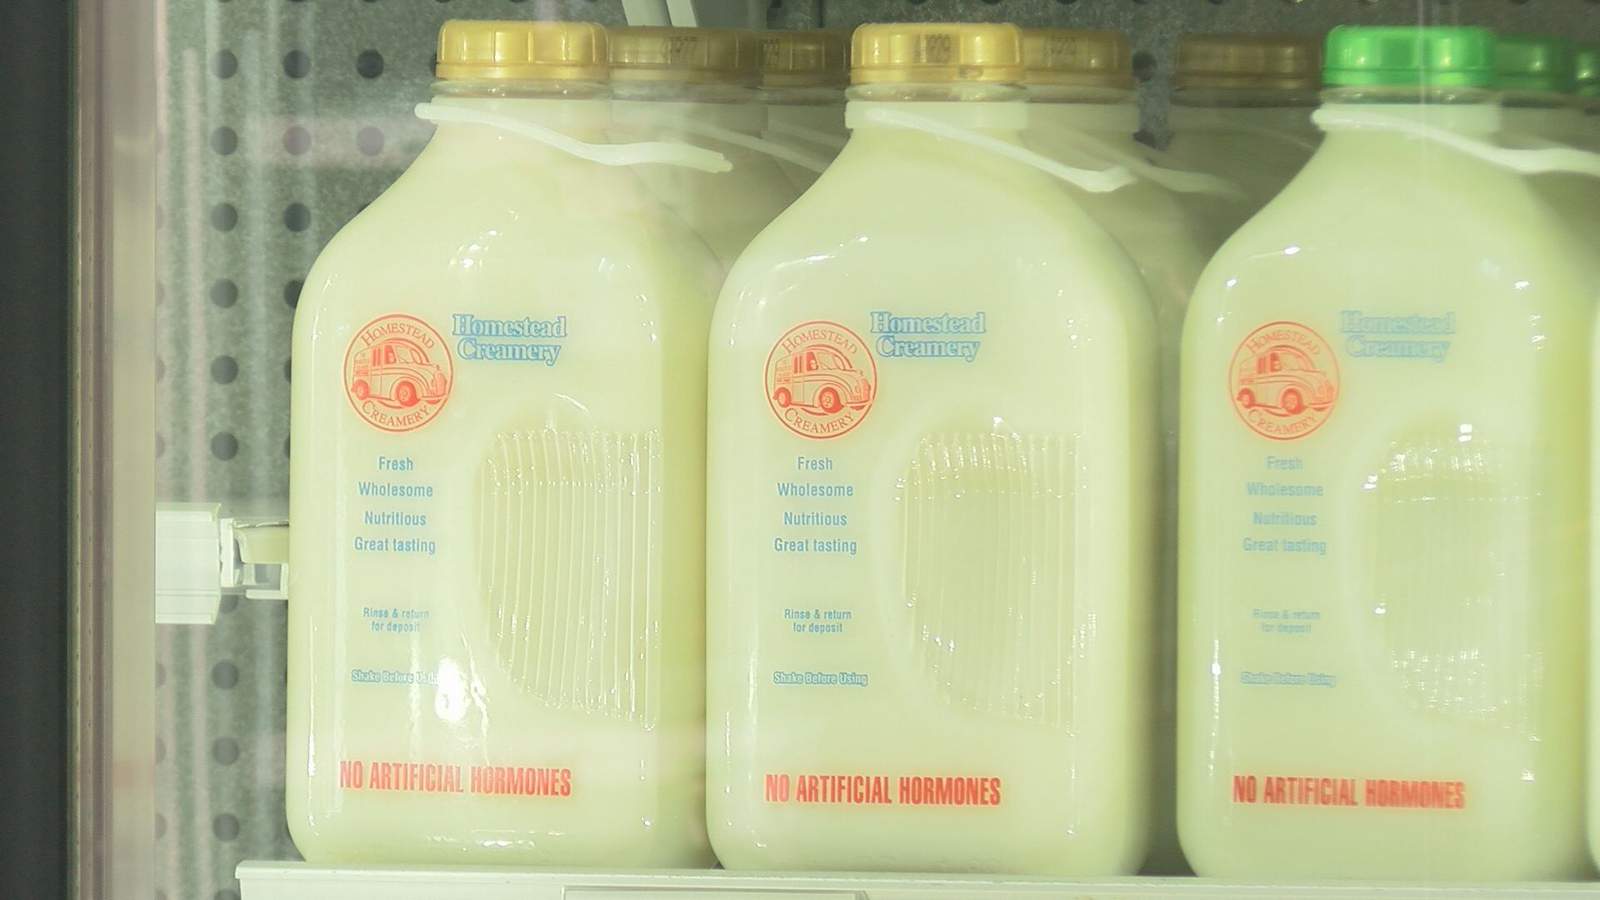 Homestead Creamery recalls products in glass bottles due to sanitation process issue